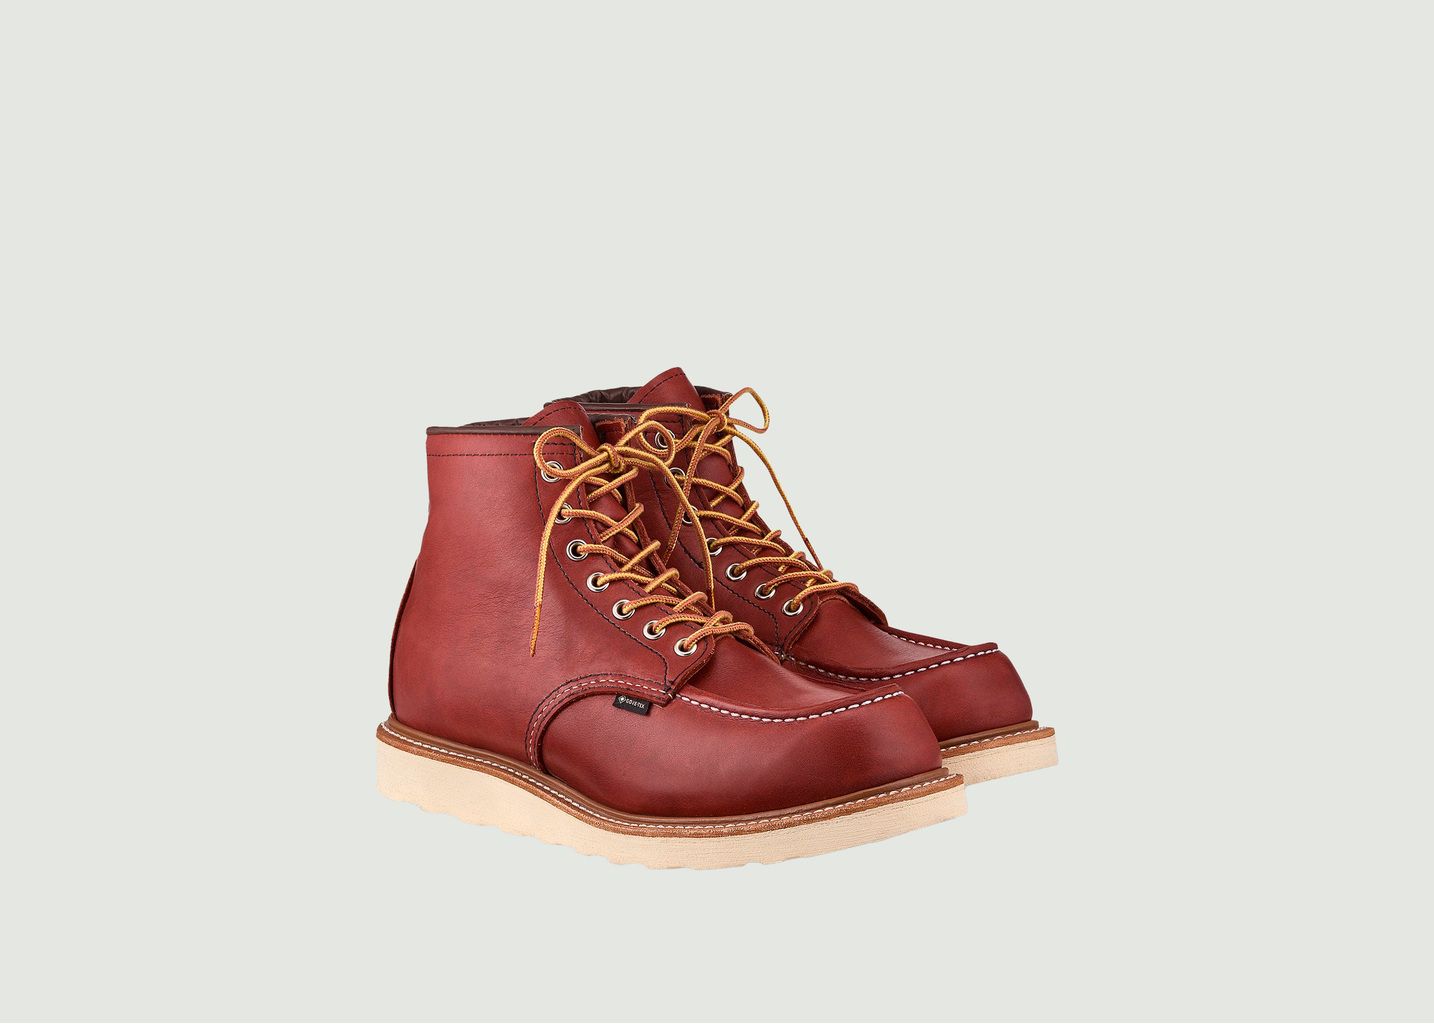 Moc Toe Shoes - Red Wing Shoes